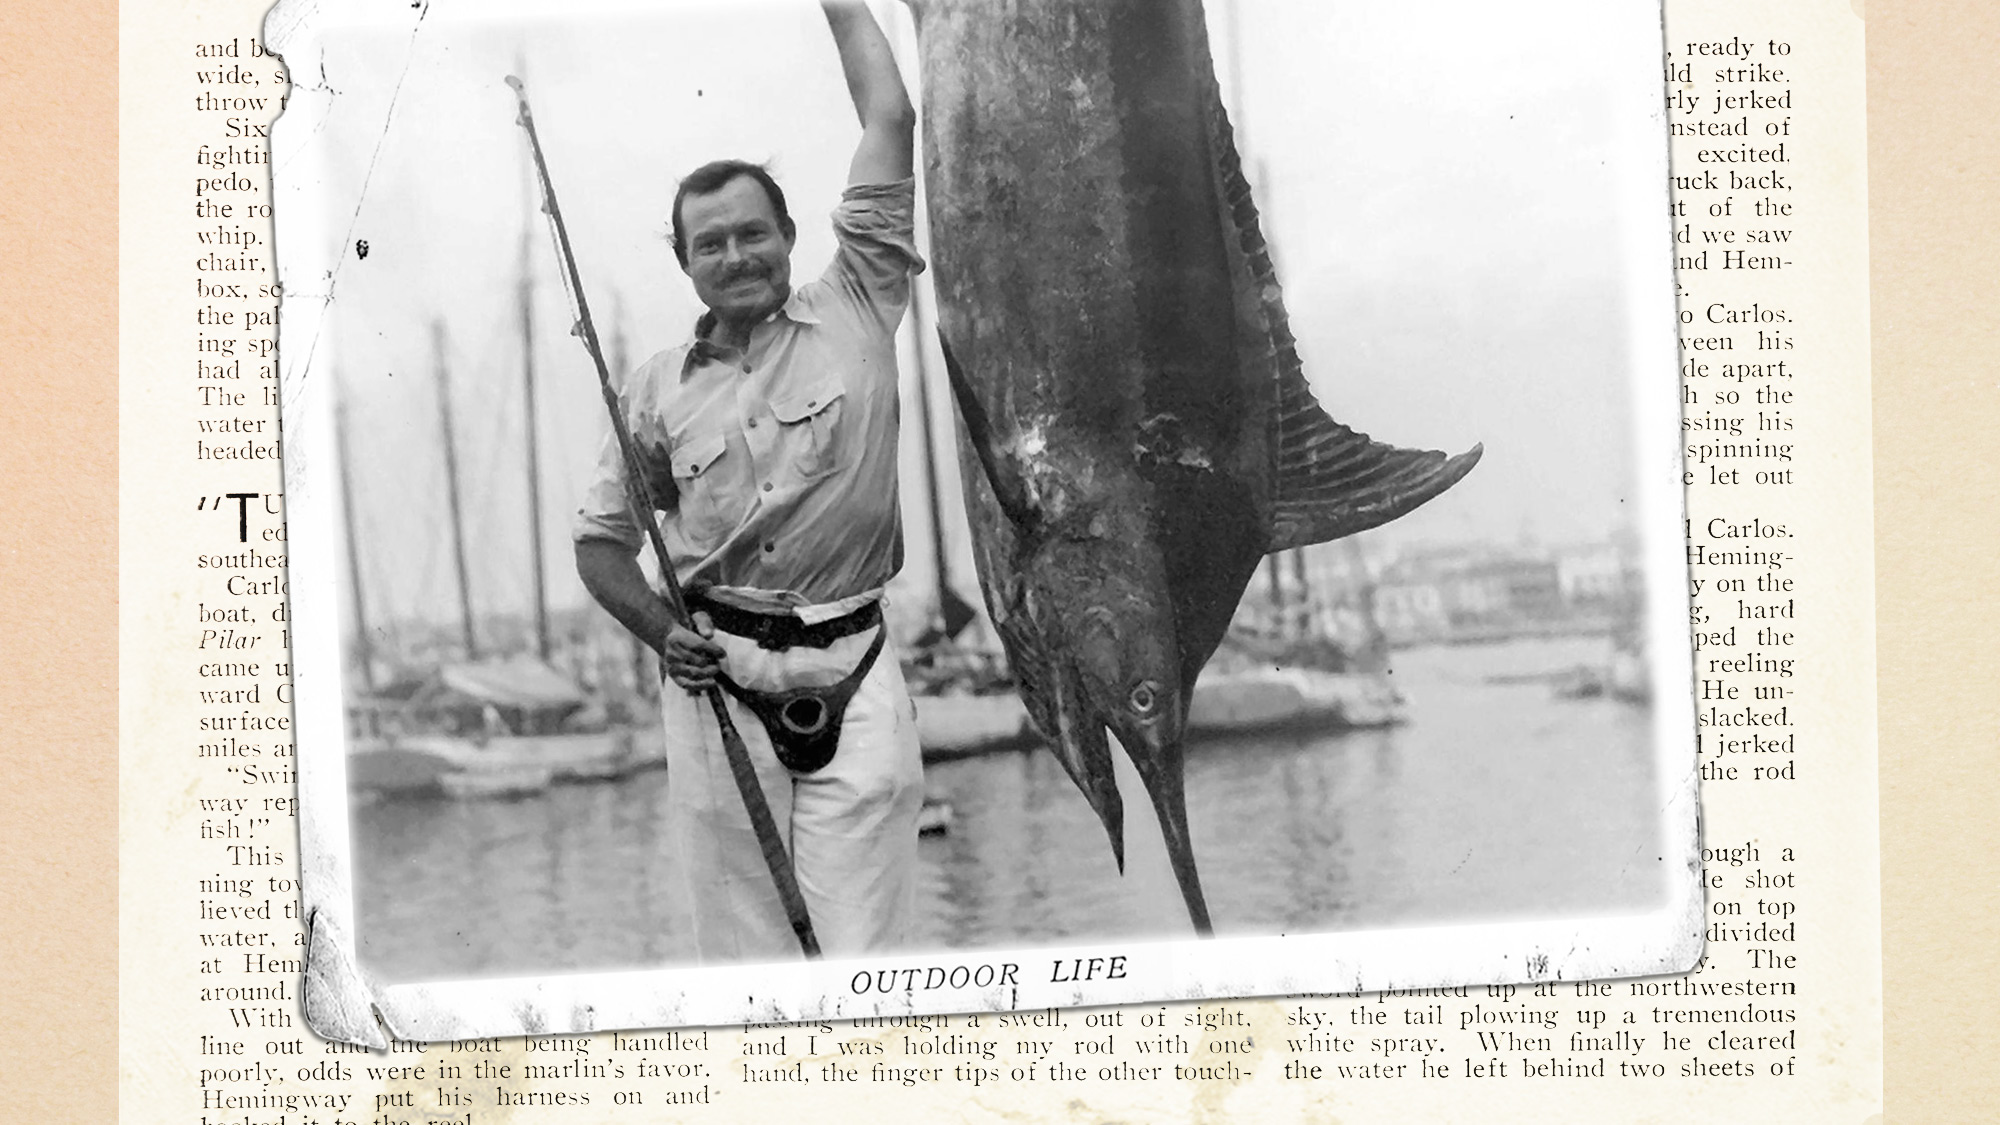 image of ernest hemingway and marlin on top of old magazine pages